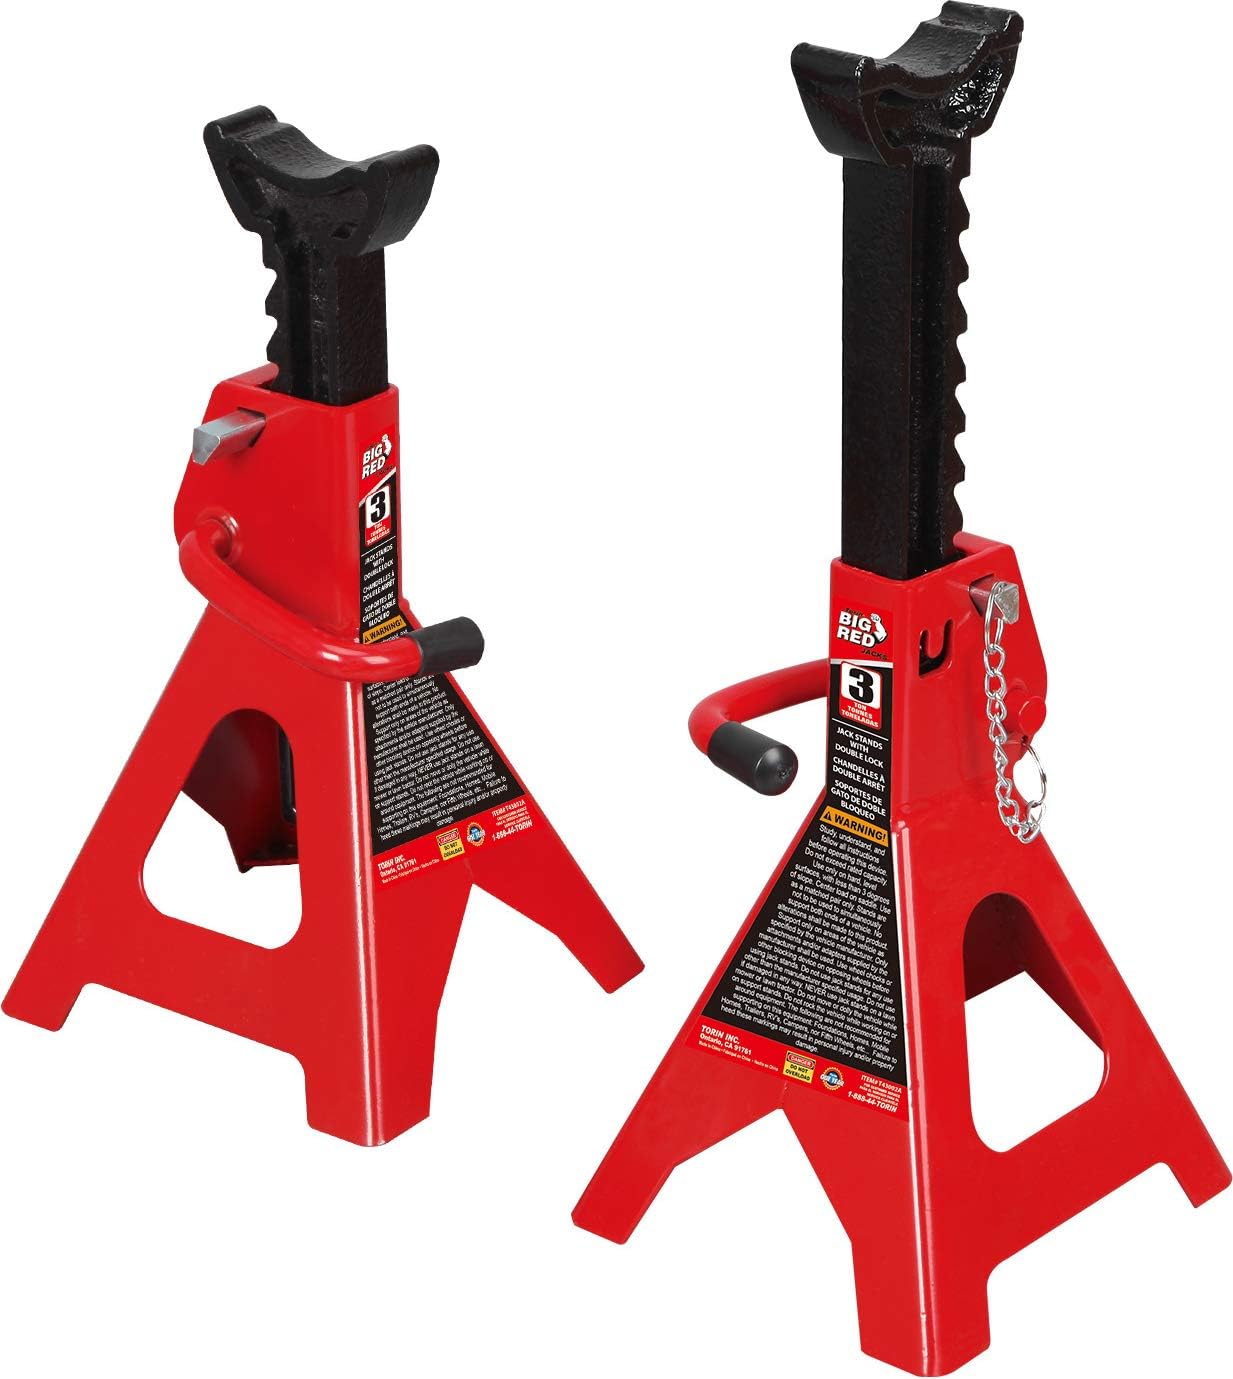 Big Red T43002A Torin Steel Jack Stands: Double Locking, 3 Ton (6,000 lb) Capacity, Red, 1 Pair